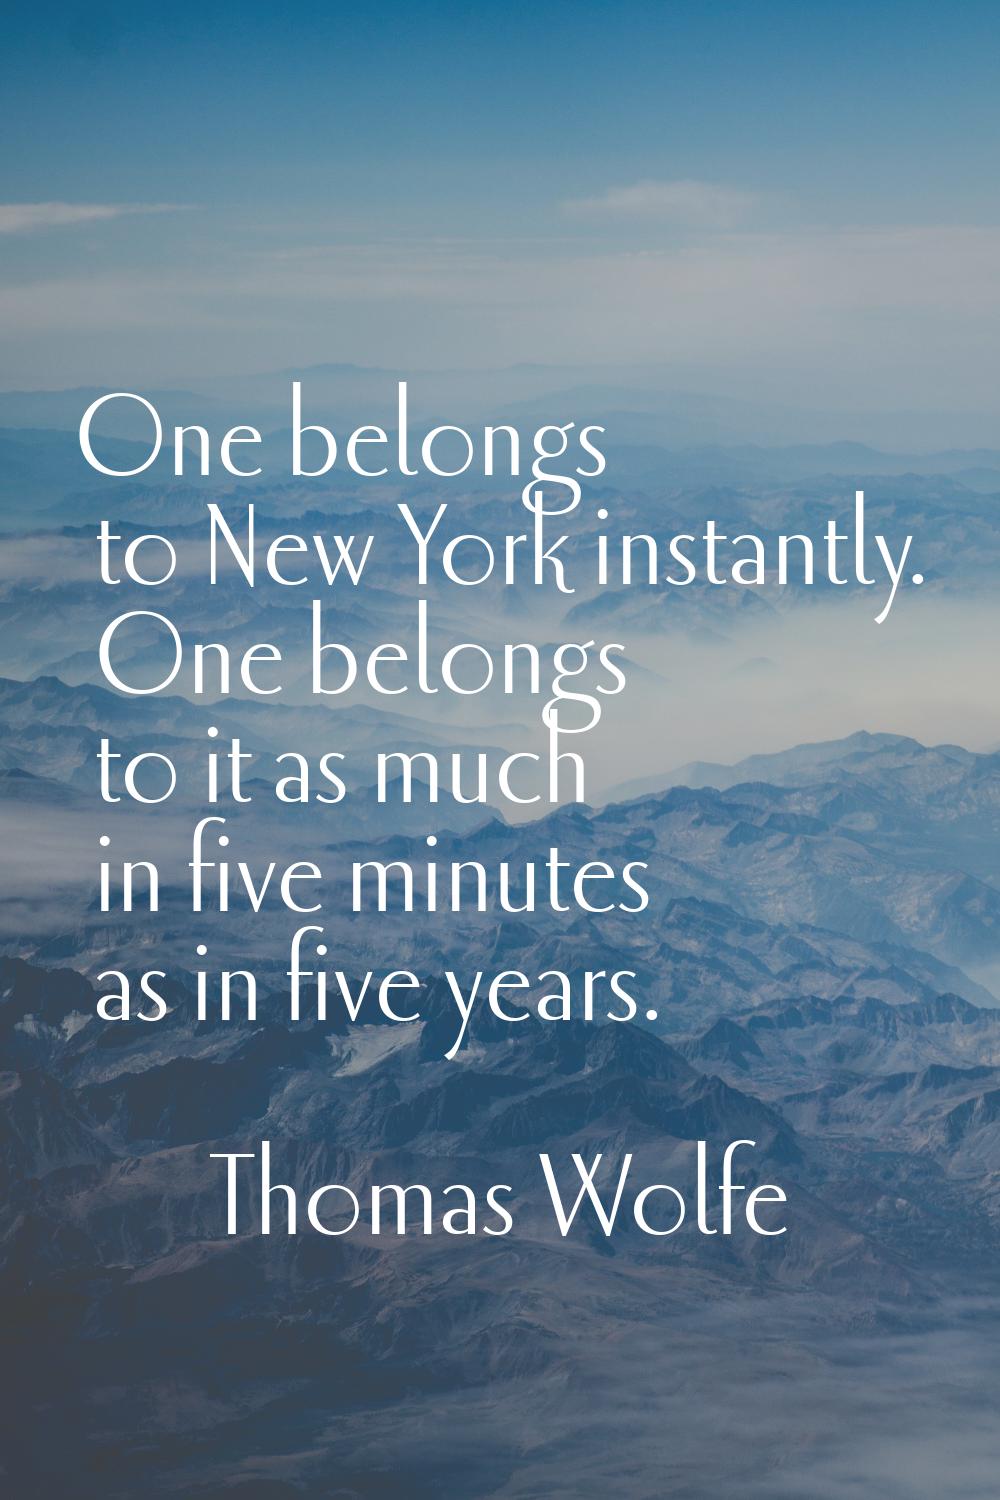 One belongs to New York instantly. One belongs to it as much in five minutes as in five years.